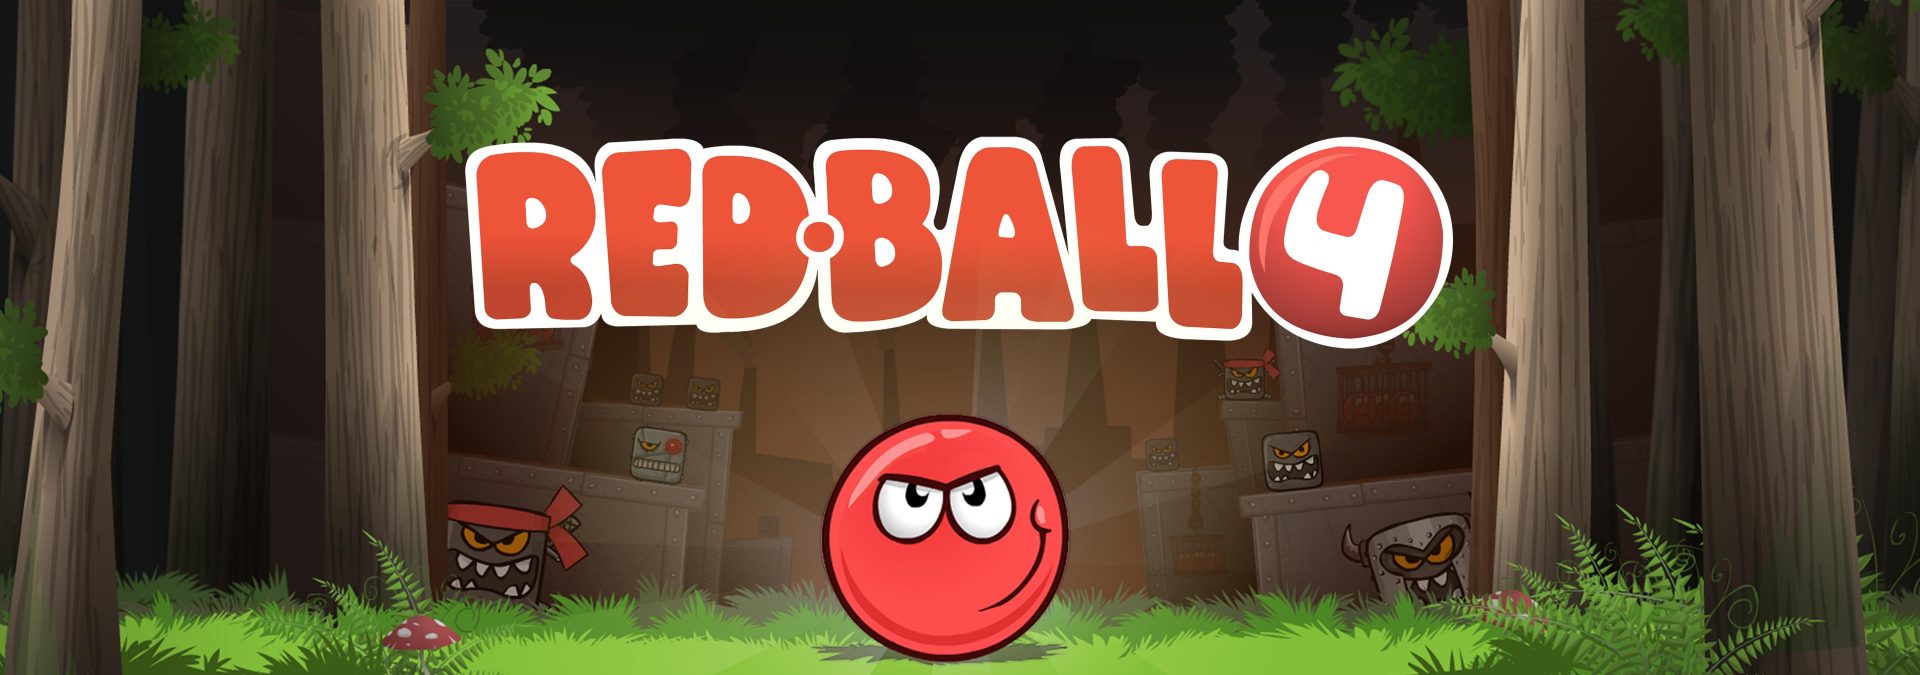 red ball for